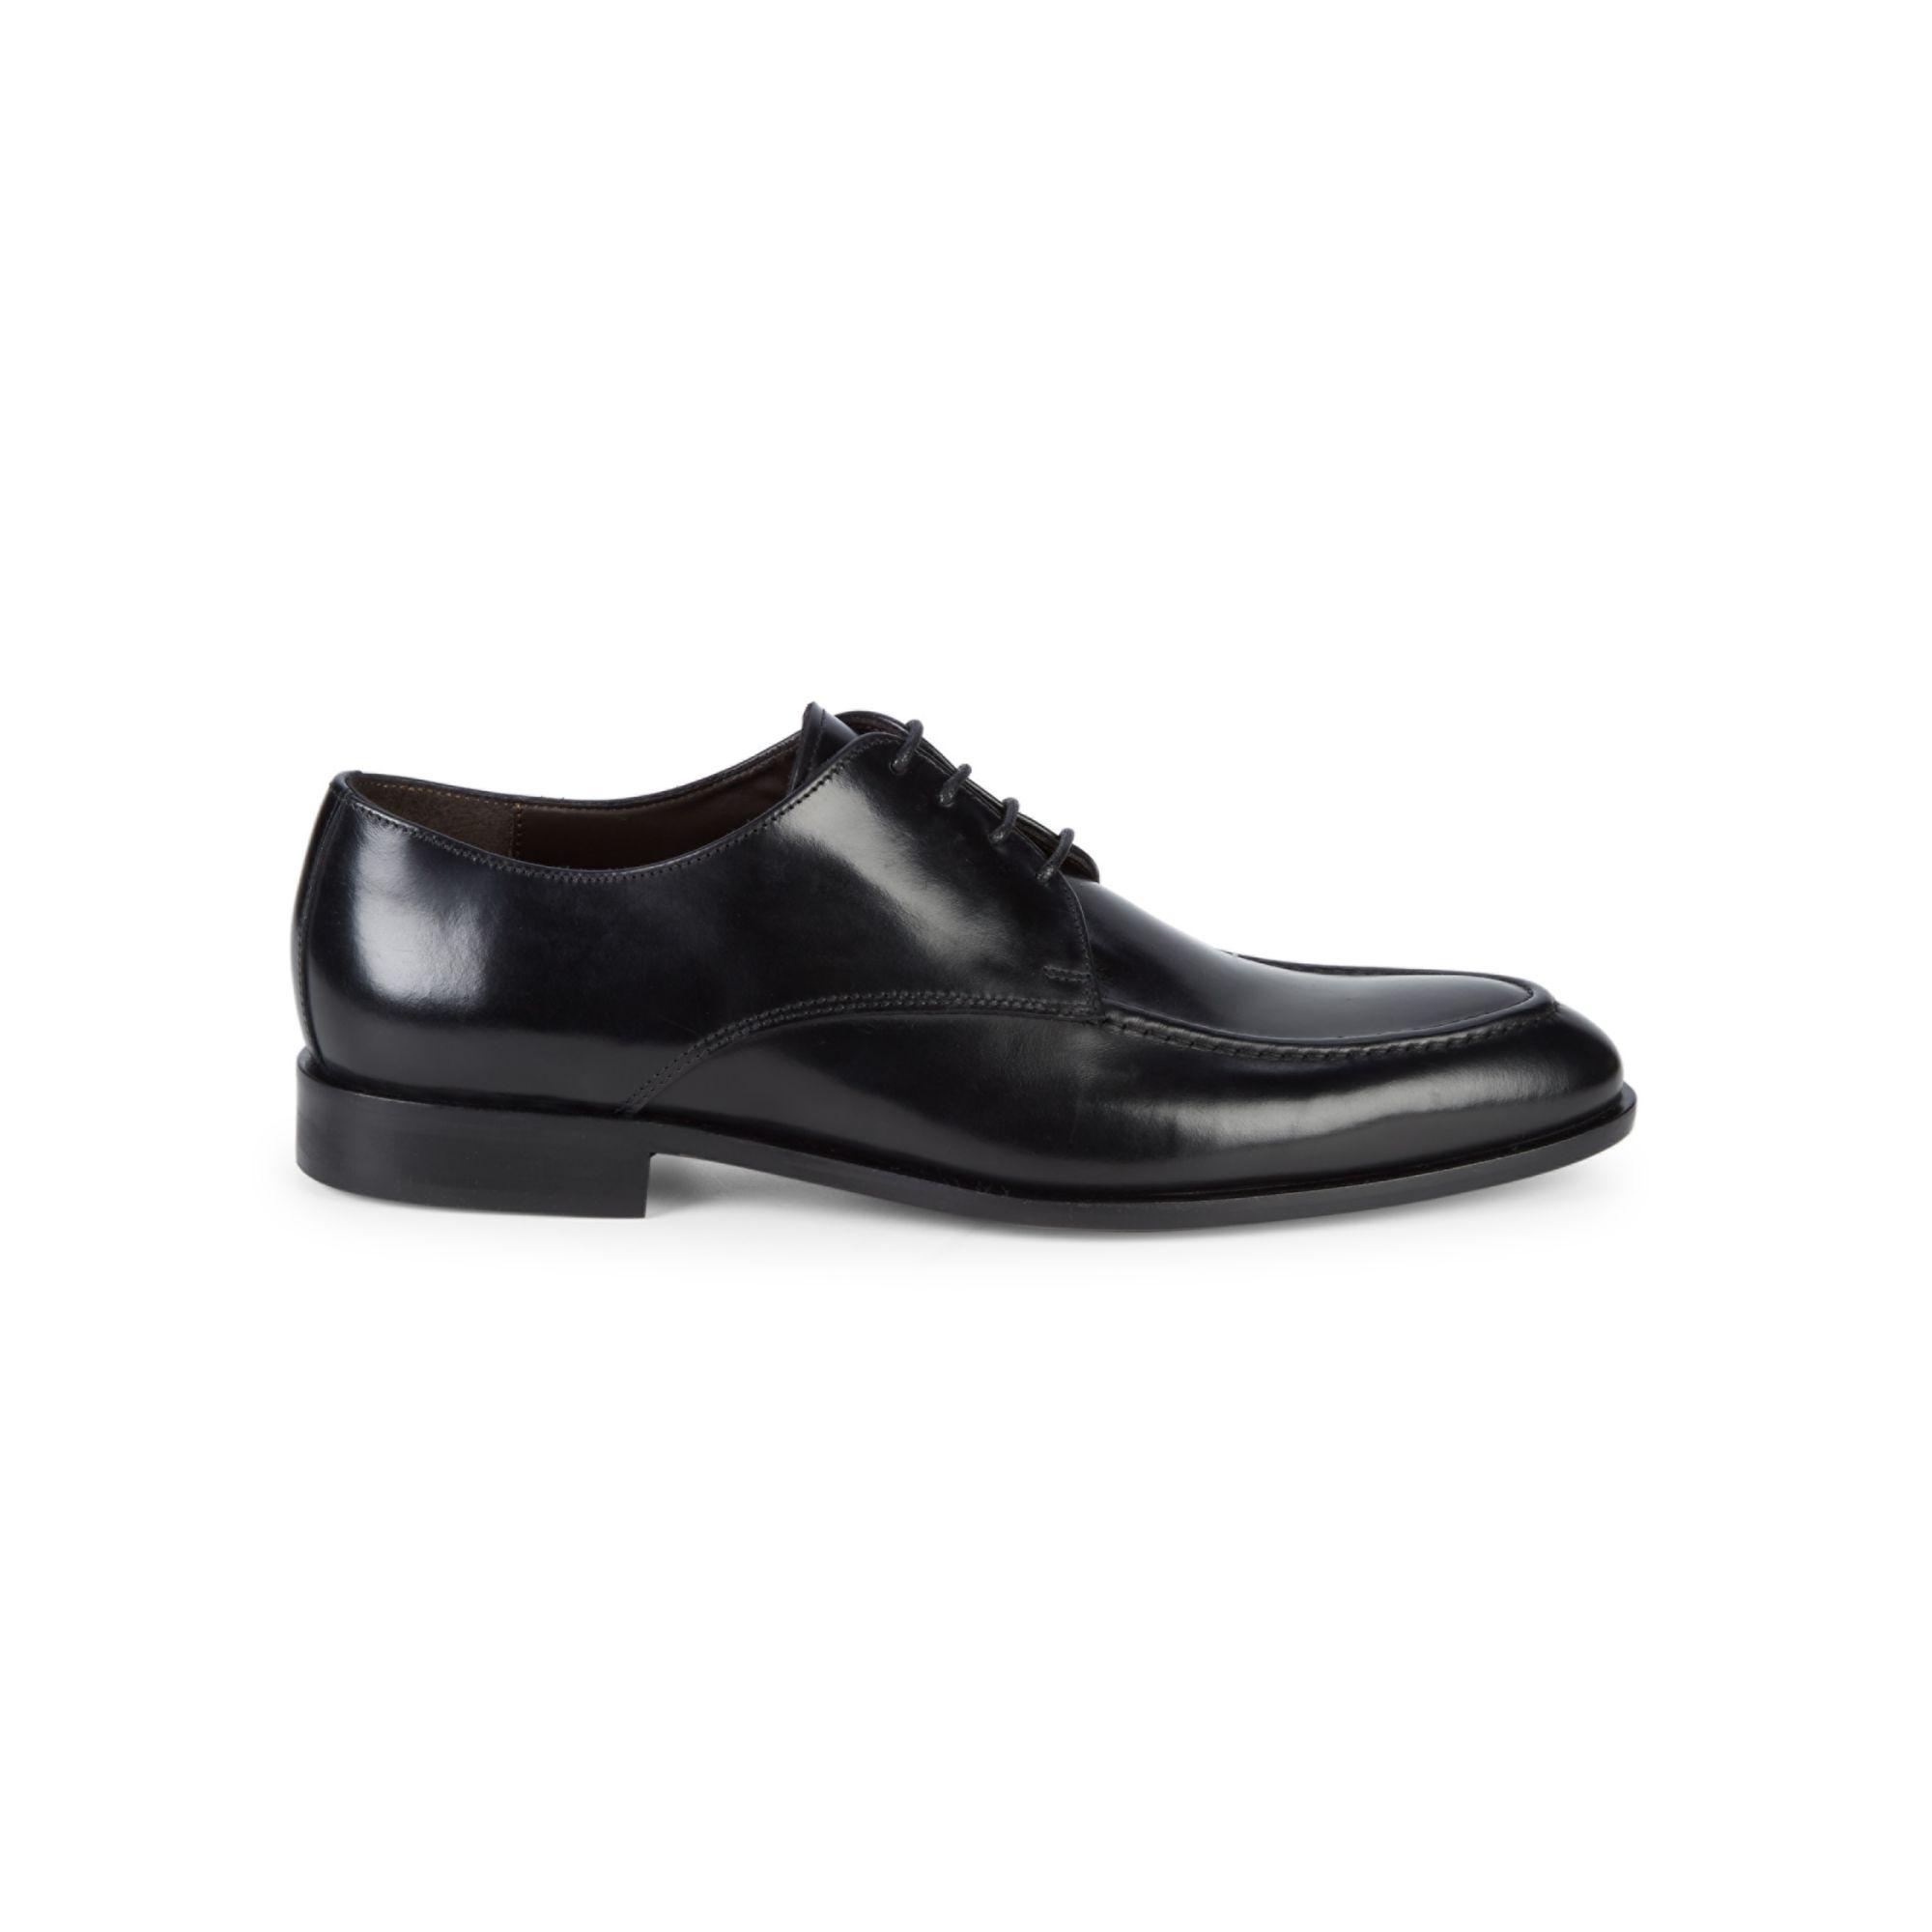 Bruno Magli Loretto Leather Derby Shoes in Black for Men - Lyst